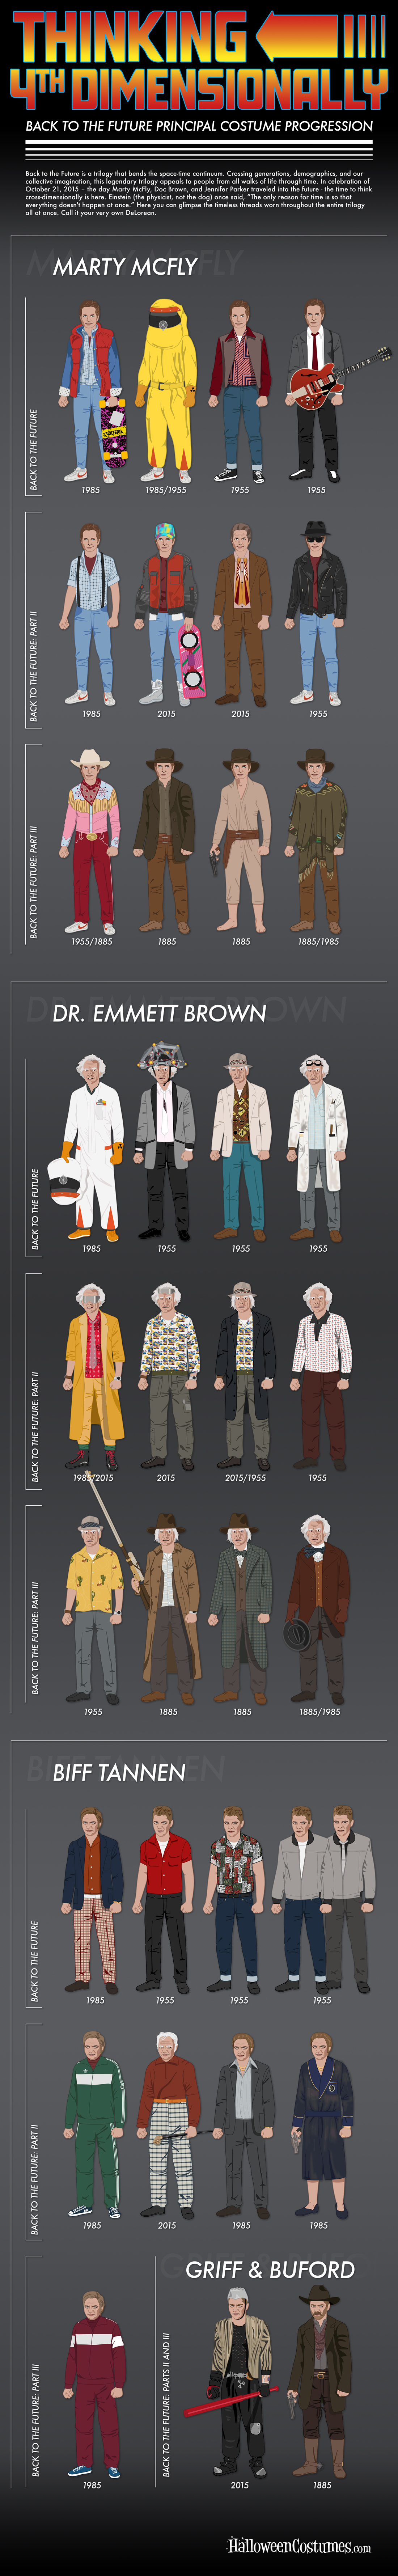 Back to the Future Costumes Infographic